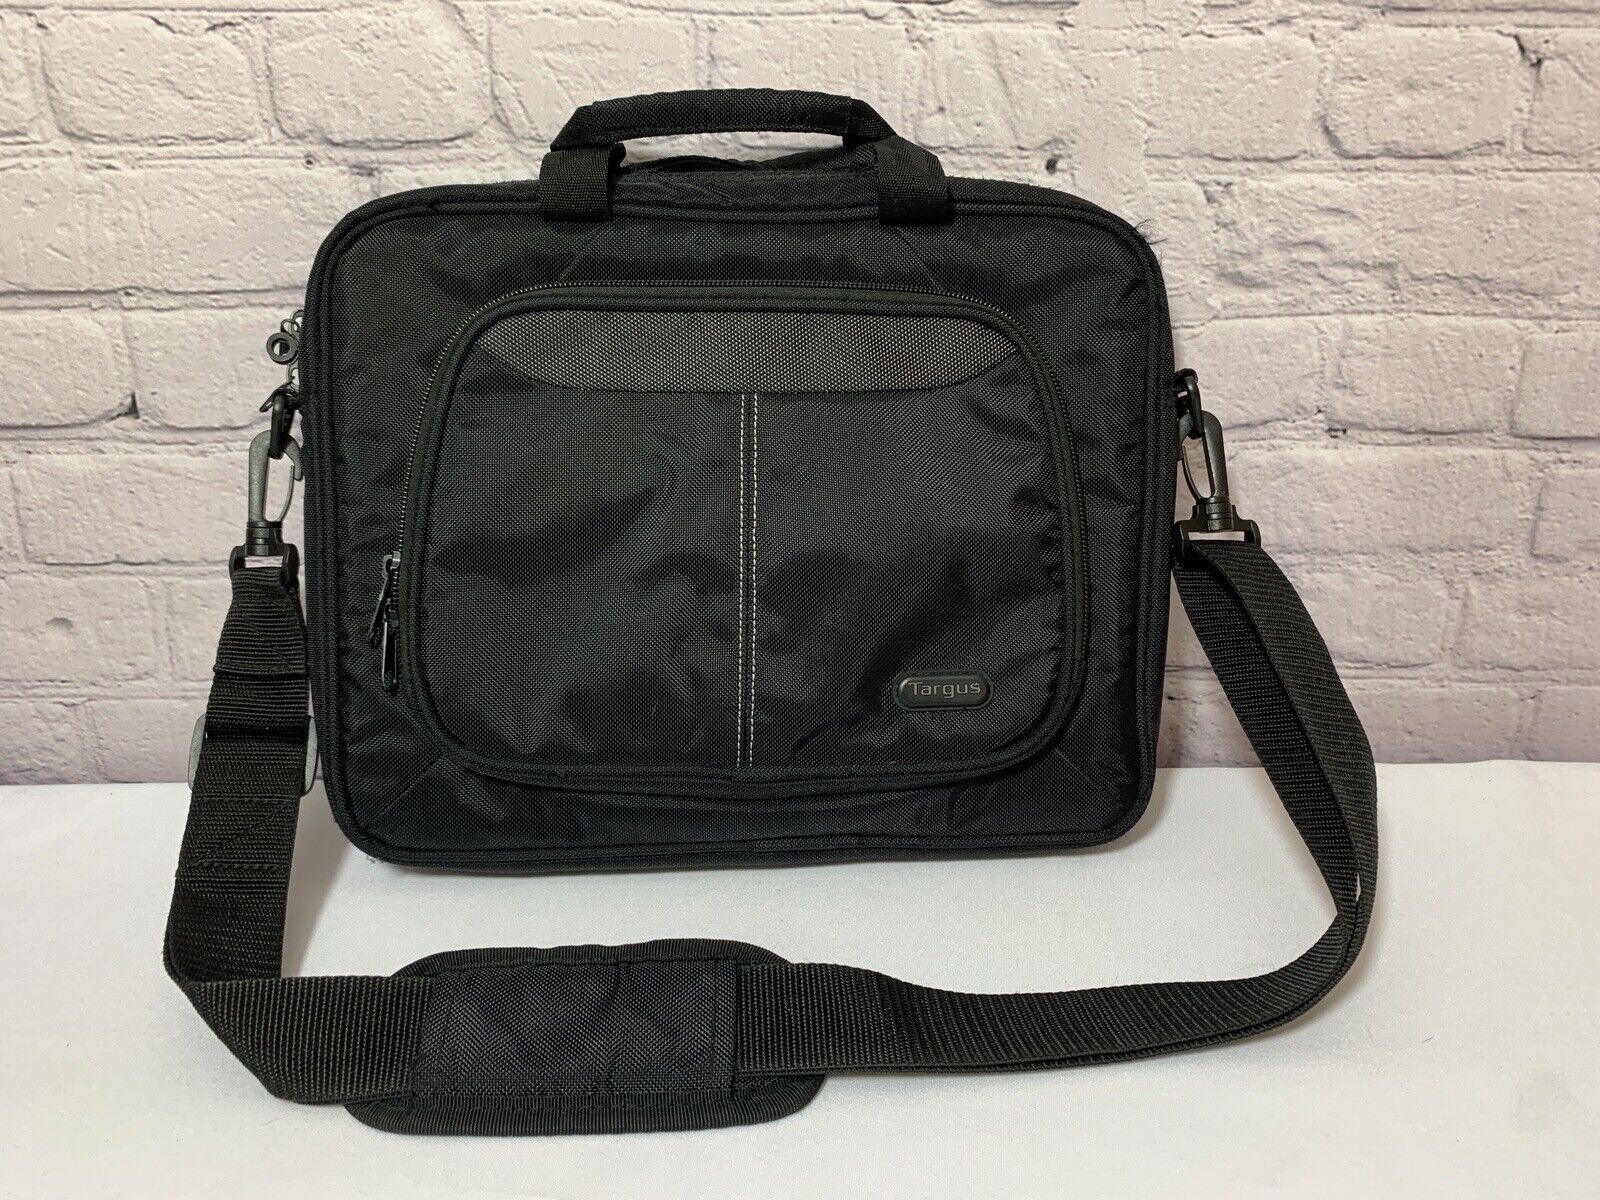 Targus Intellect Black Laptop Bag With Straps for 12in Laptops TBT248US